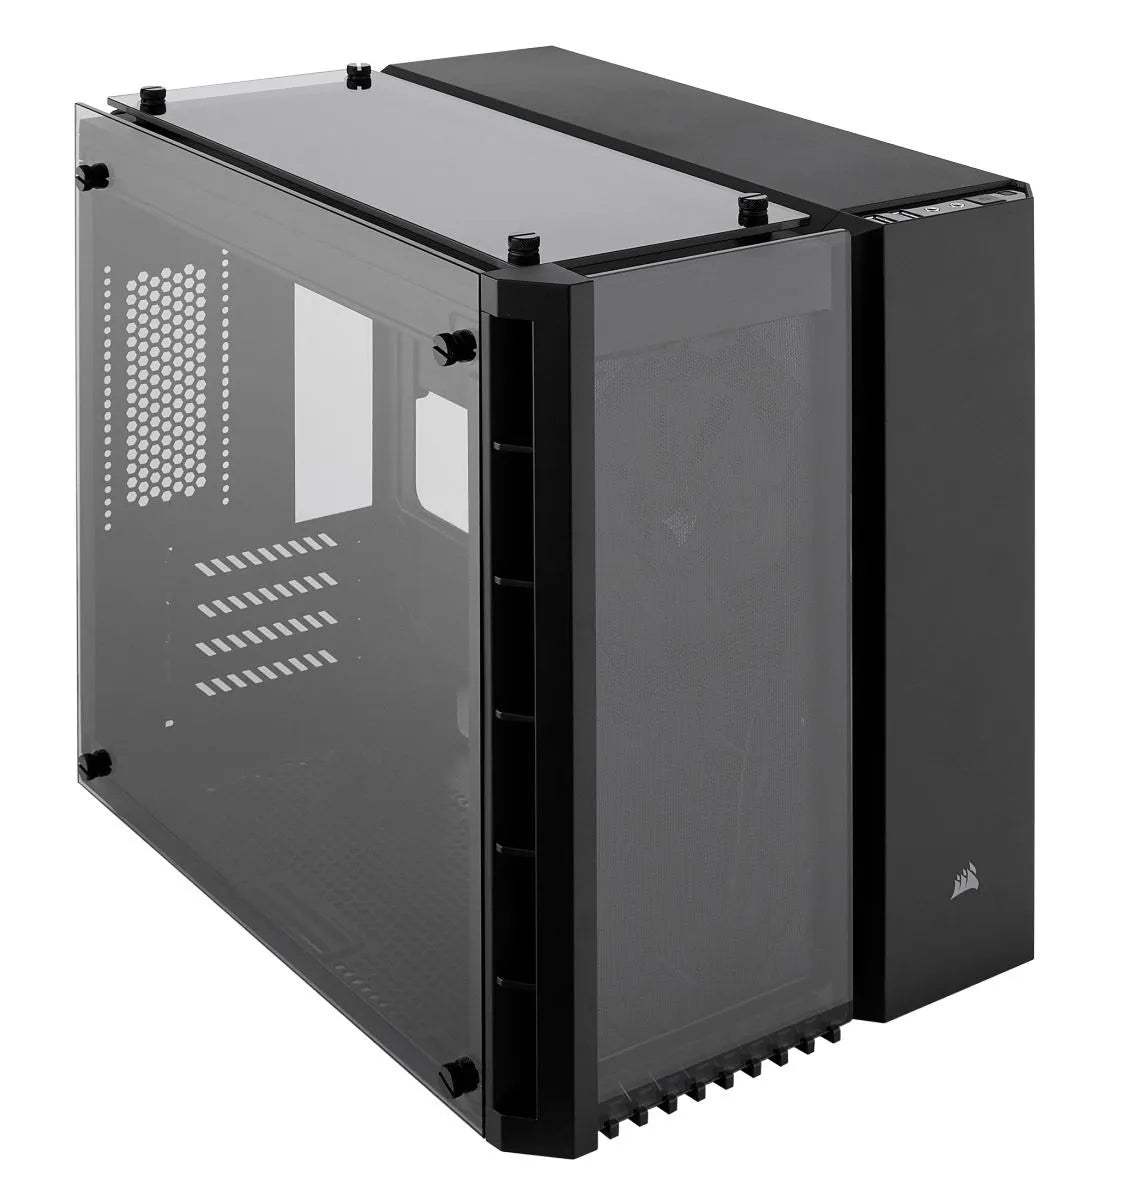 Corsair Crystal Series 280X Tempered Glass Micro ATX PC Case; Black; Temperted Glass Panel